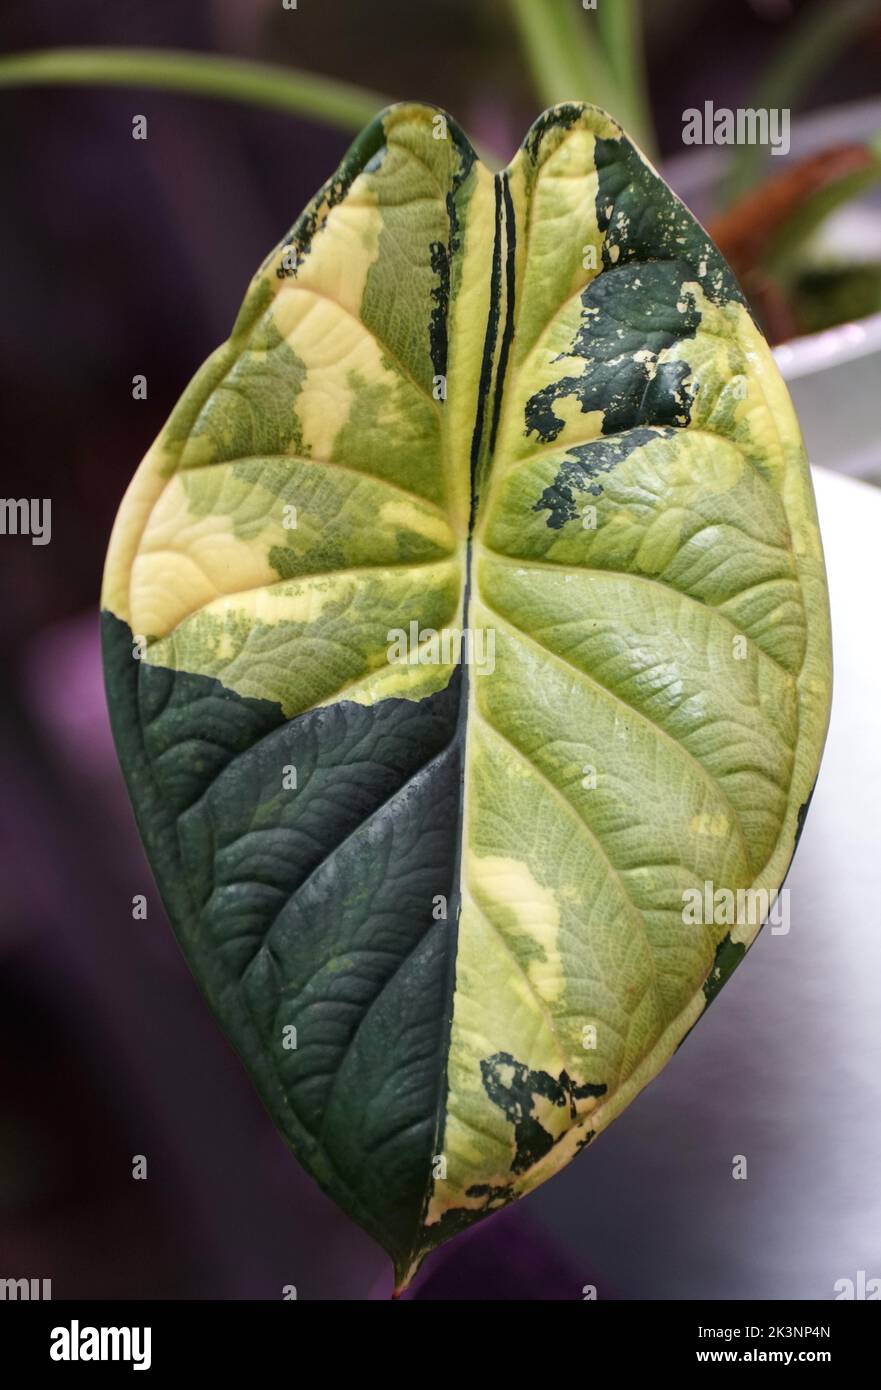 Stunning dark green and yellow marbled variegated leaf of Alocasia Dragon Scale variegated, a rare tropical plant Stock Photo